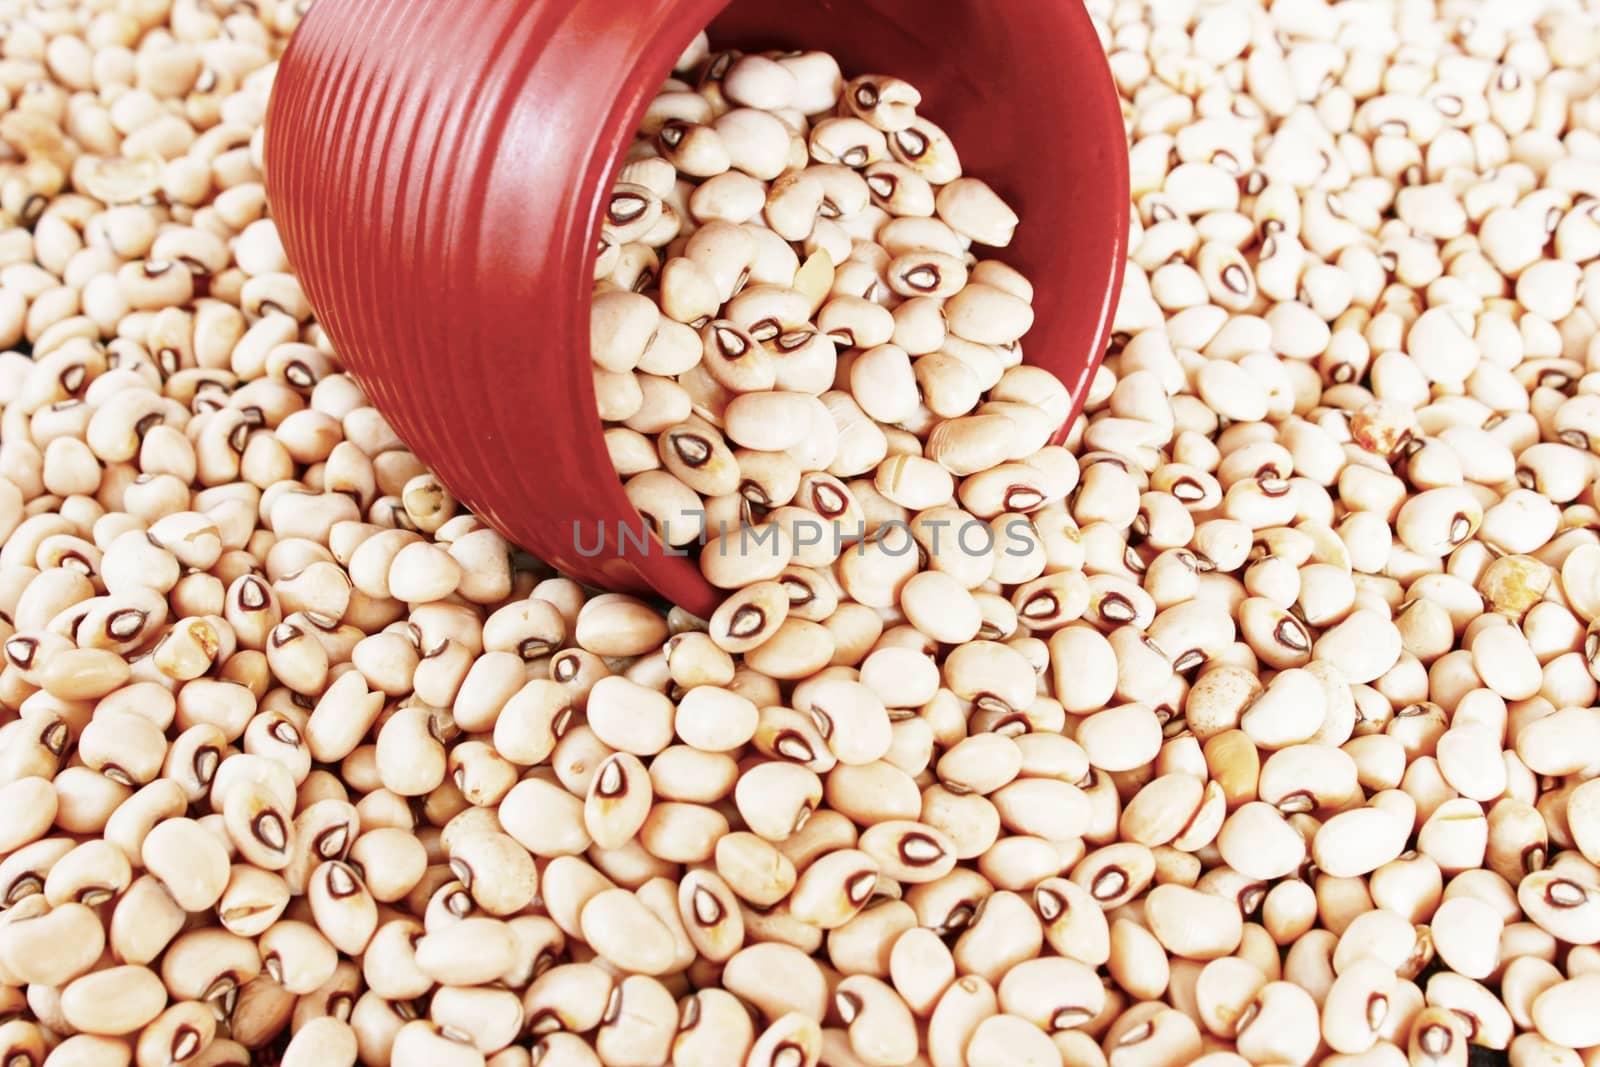 Black eyed peas or beans are a vegetarian  protein source. These belong to the legumes family. The photo includes a terracotta measuring cup amidst the beans. 
